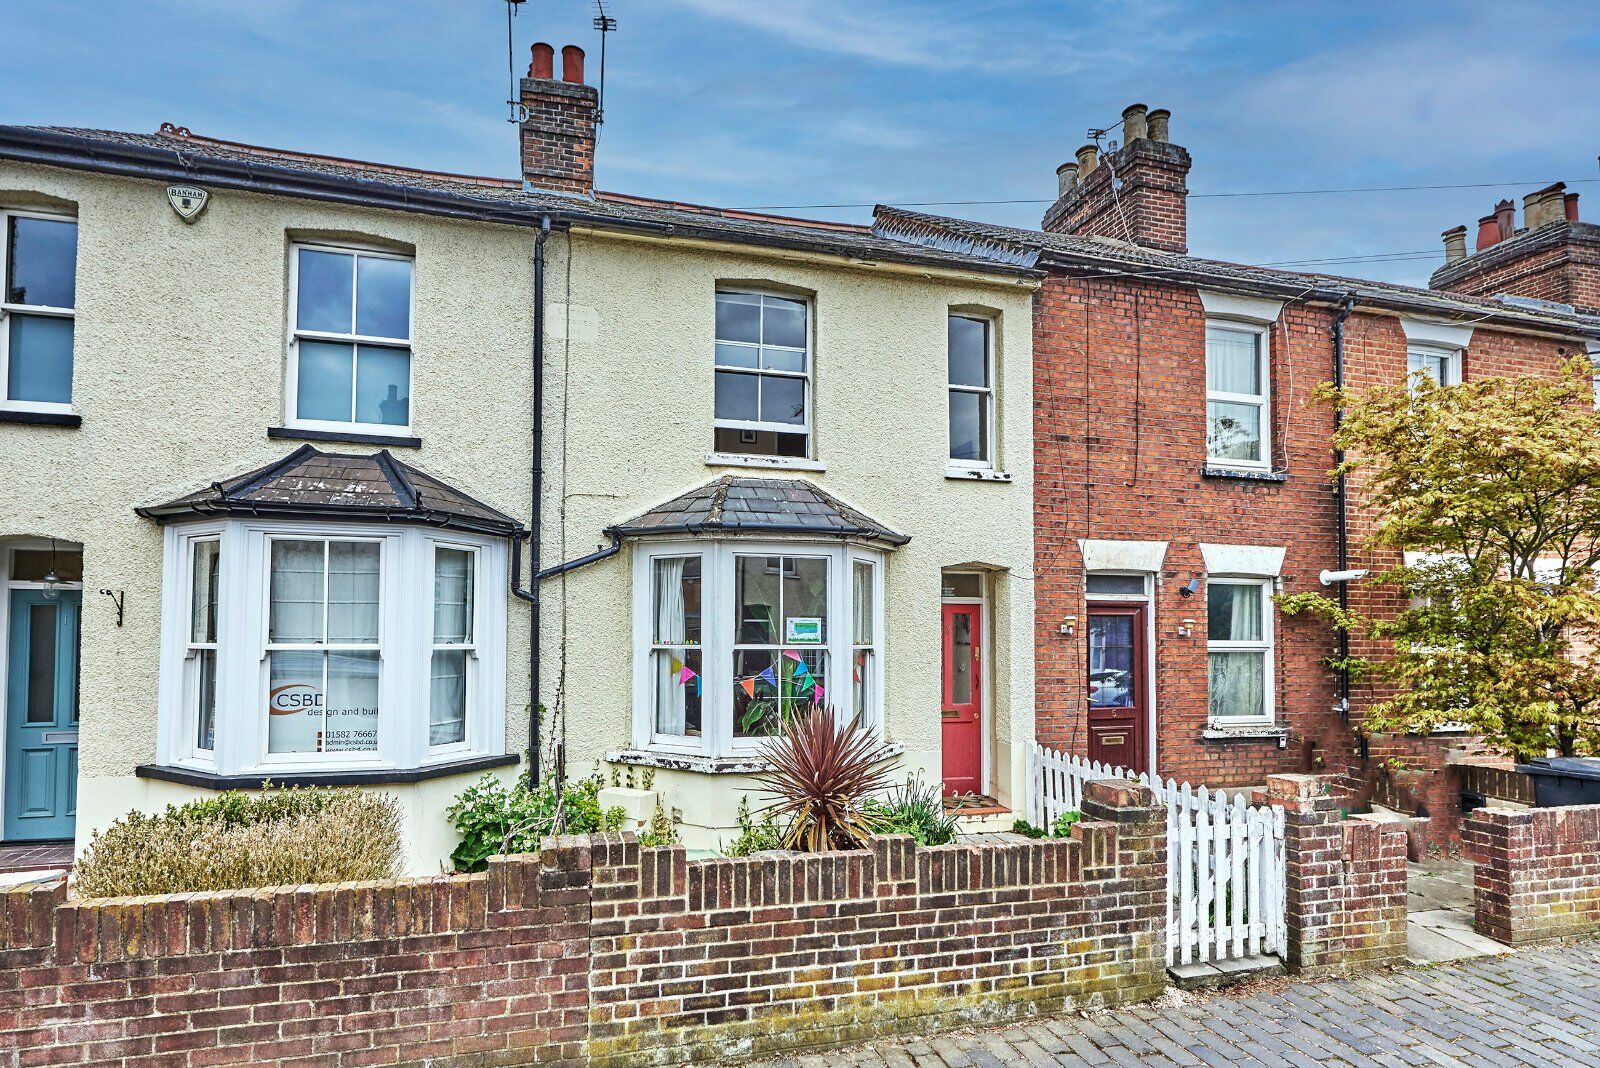 3 bedroom mid terraced house for sale Culver Road, St. Albans, AL1, main image